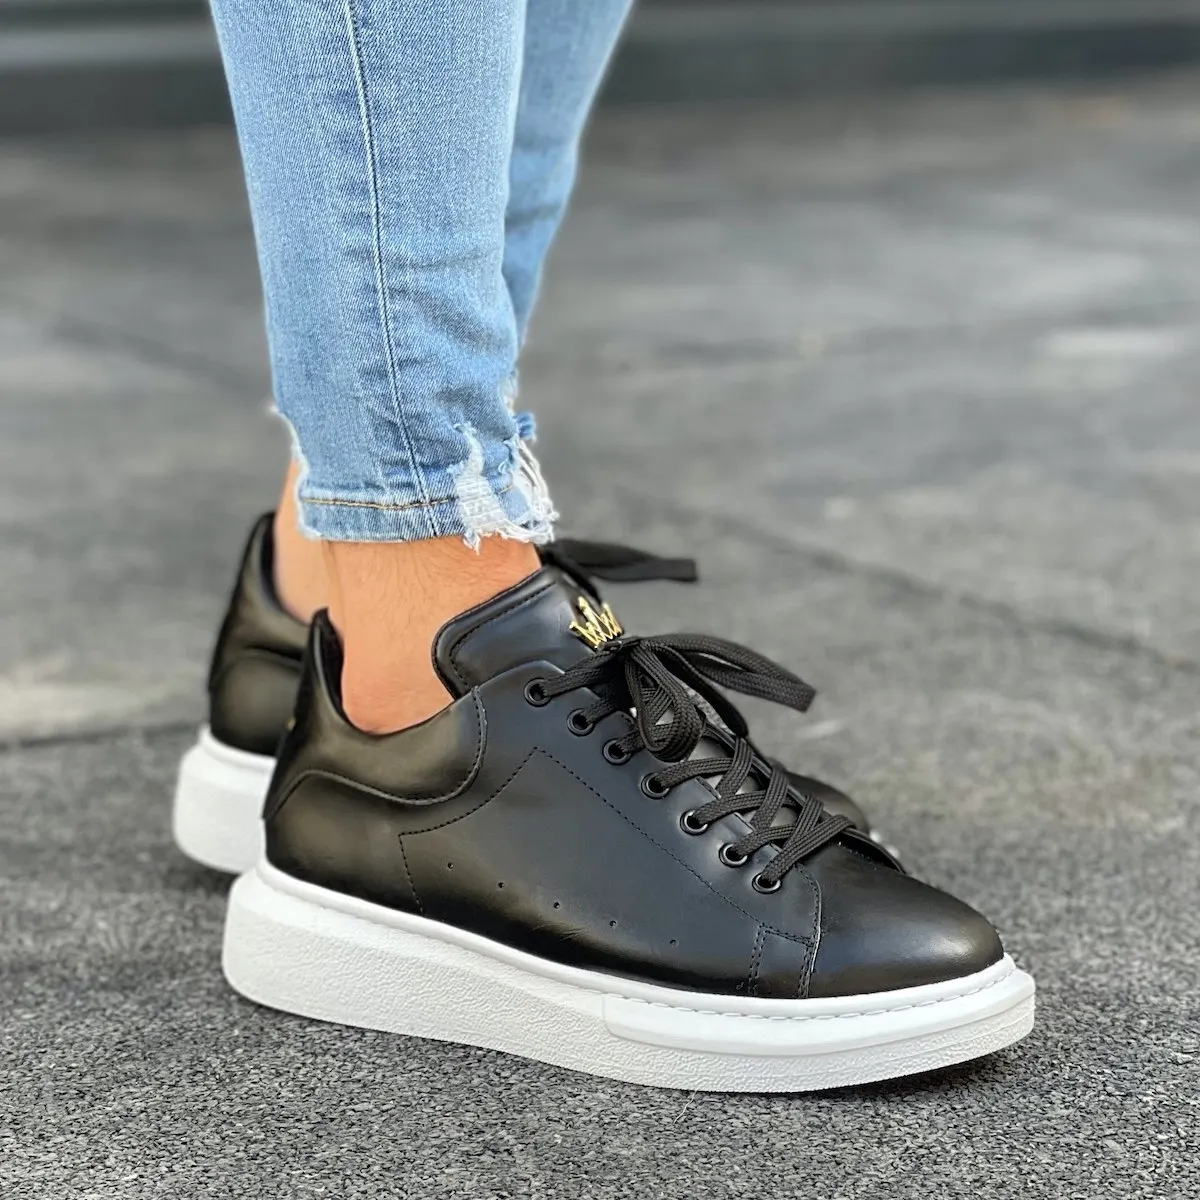 Source Mens Crowned High Sole Sneakers Shoes in Black and White Urban Streetwear Handmade Sneakers Wholesale Offer 2023 on m.alibaba.com